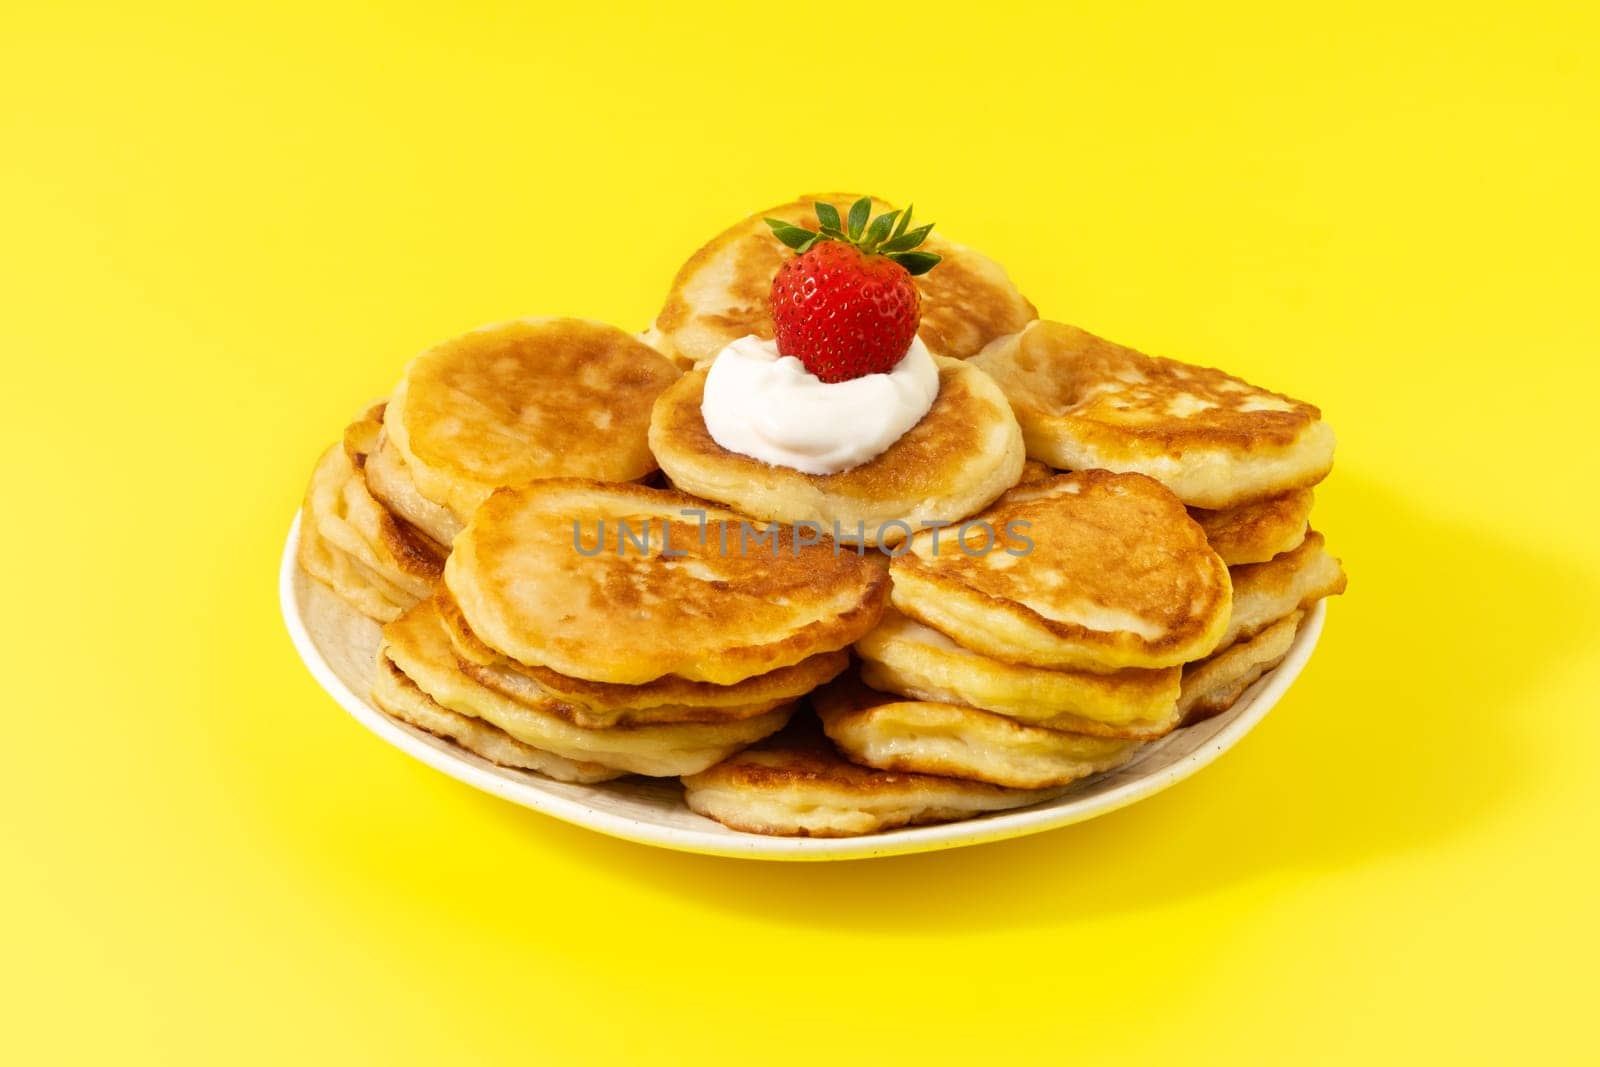 Mini pancakes with strawberries and sour cream on a yellow background.